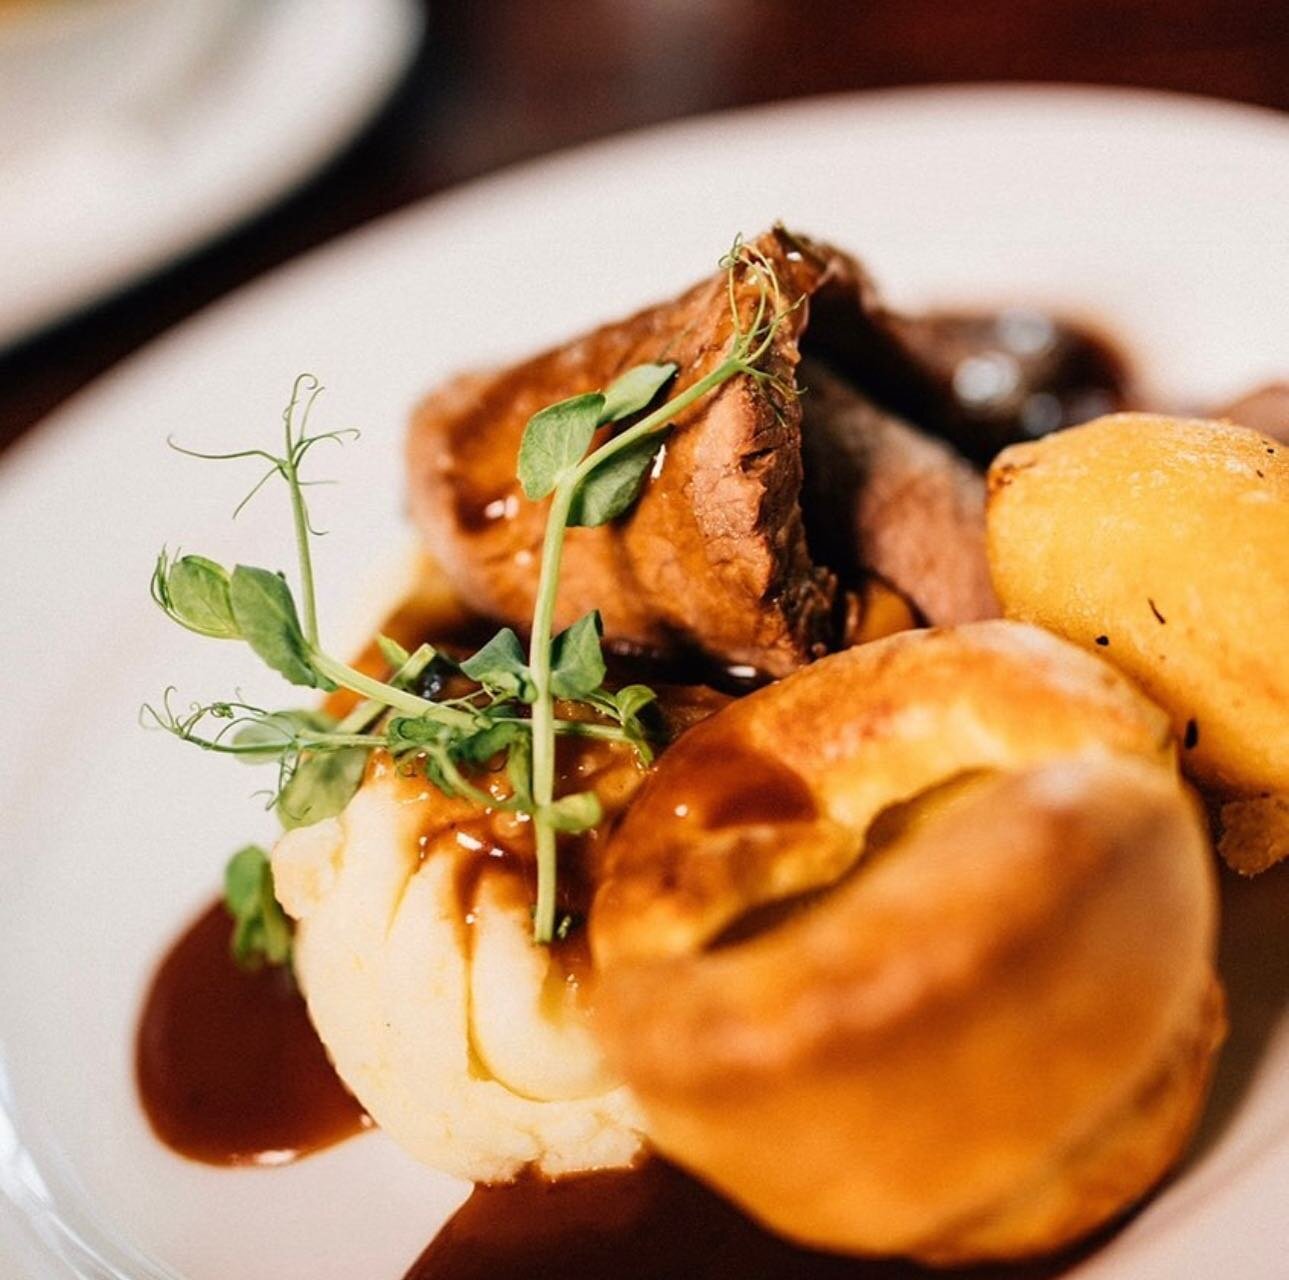 Join us today for our Famous Sunday Lunch 🍽️ Traditional Sunday Lunch set-menu available from 12.30pm to 3.30pm

For bookings, please call 00353-429376193 or click the link in bio to reserve your table ☘️